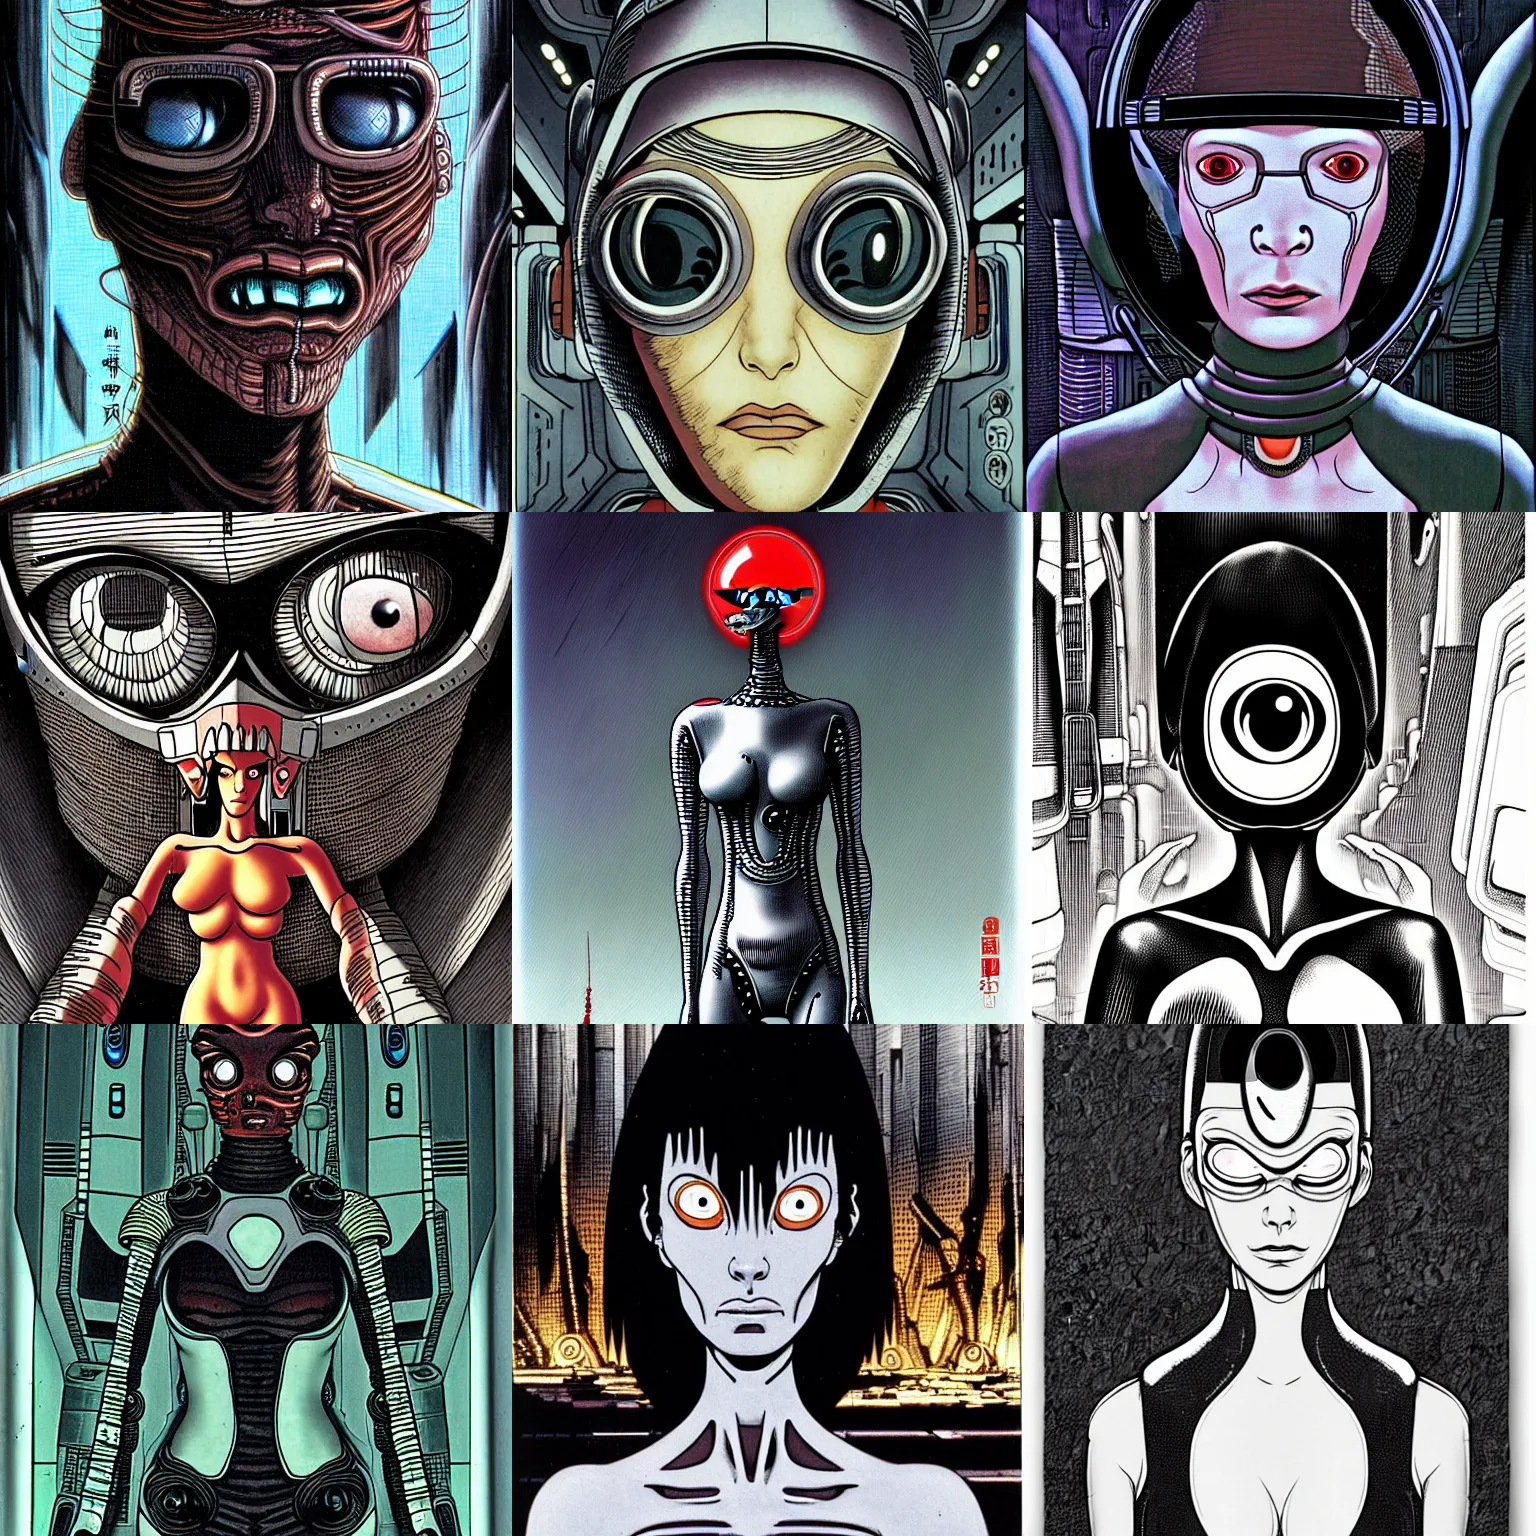 Prompt: portrait turanga leela with one eye from futurama in futuristic city, by tsutomu nihei, by h. r. giger